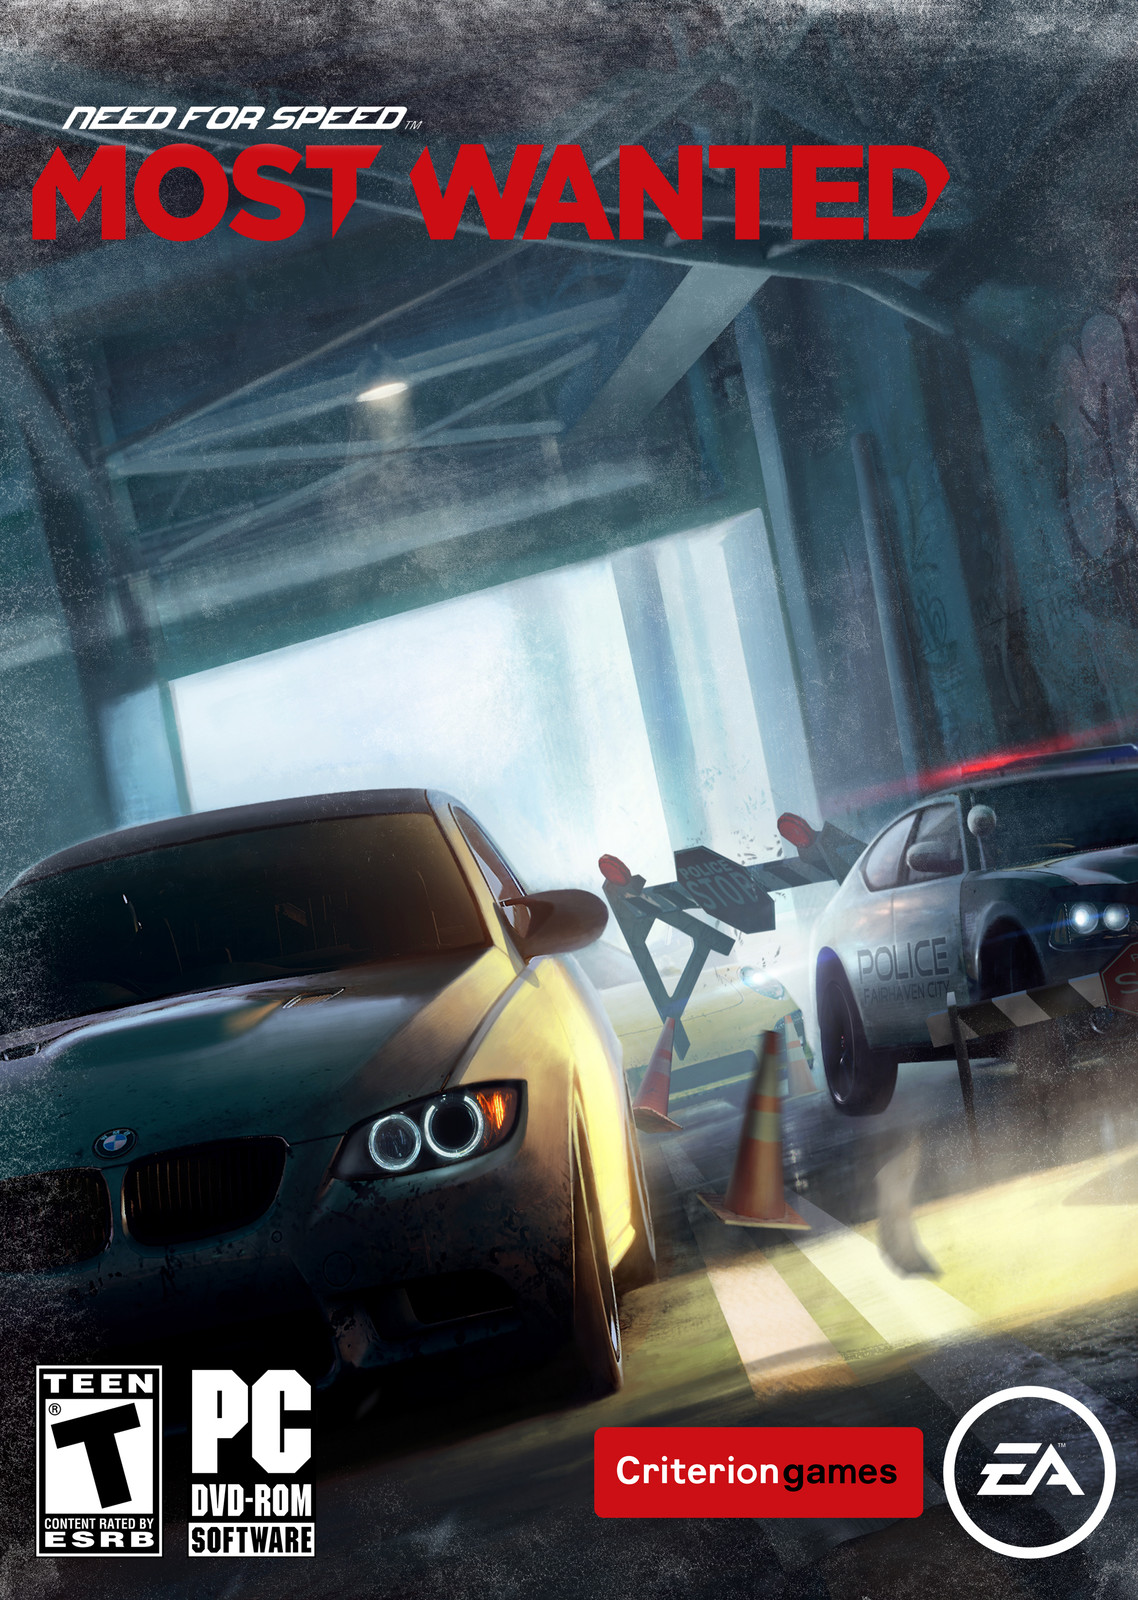 Need for Speed Most Wanted 2012 Alternative Cover (Original Idea)